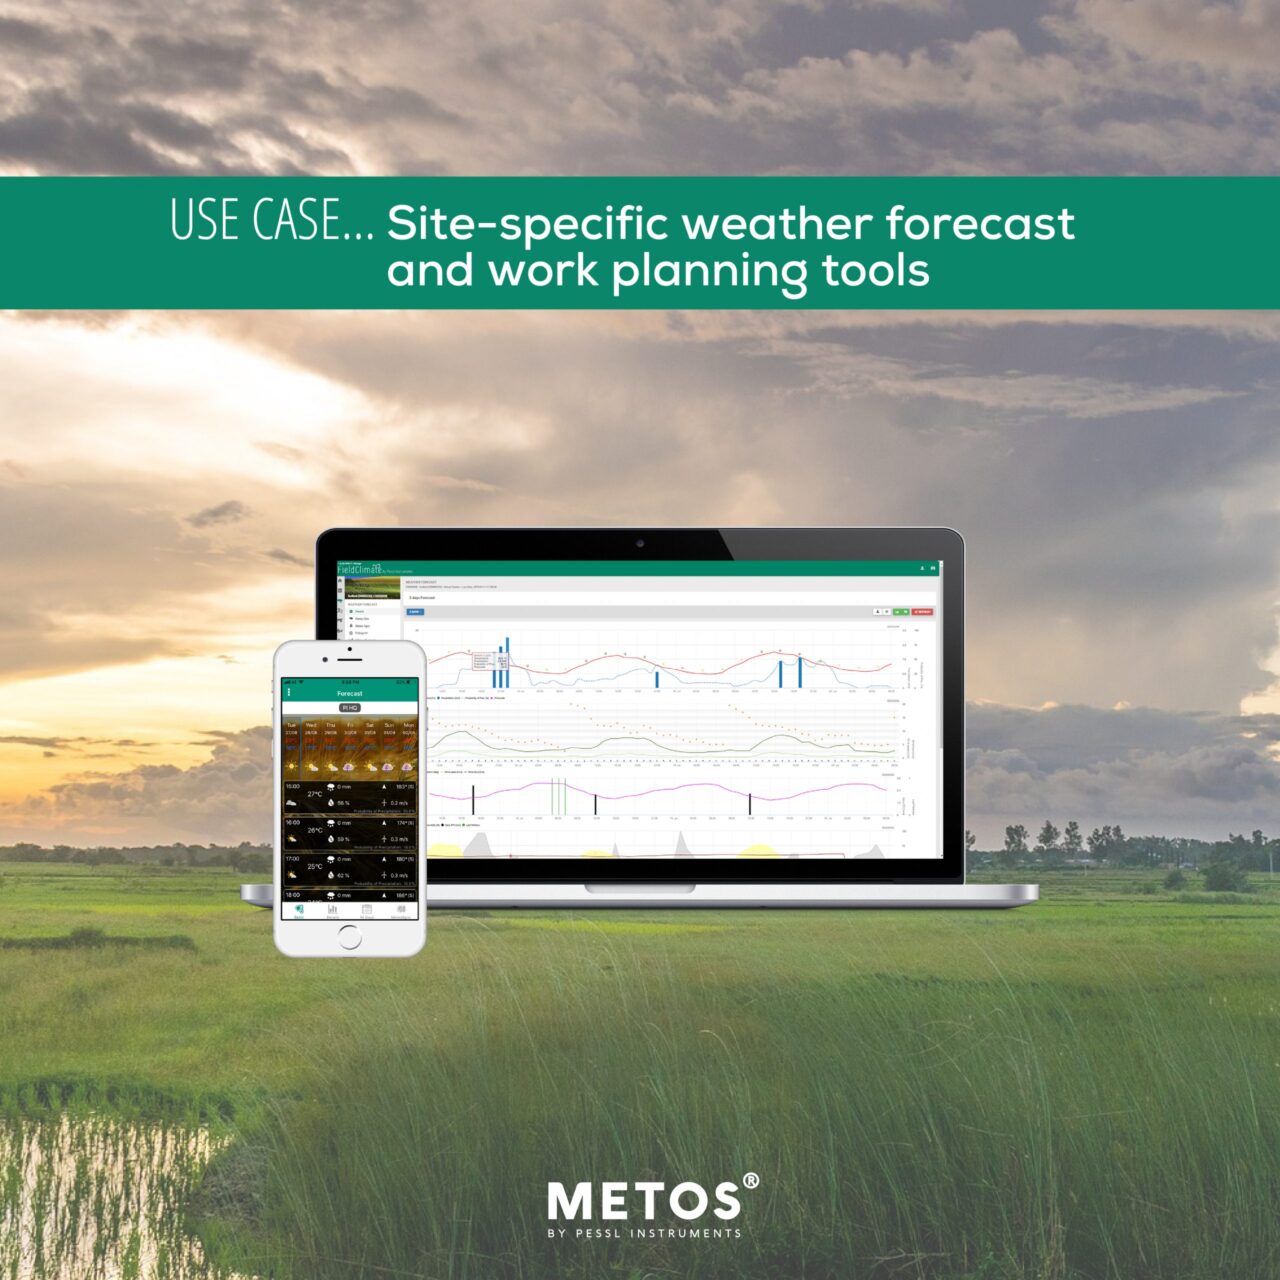 Importance of weather forecasting in agriculture